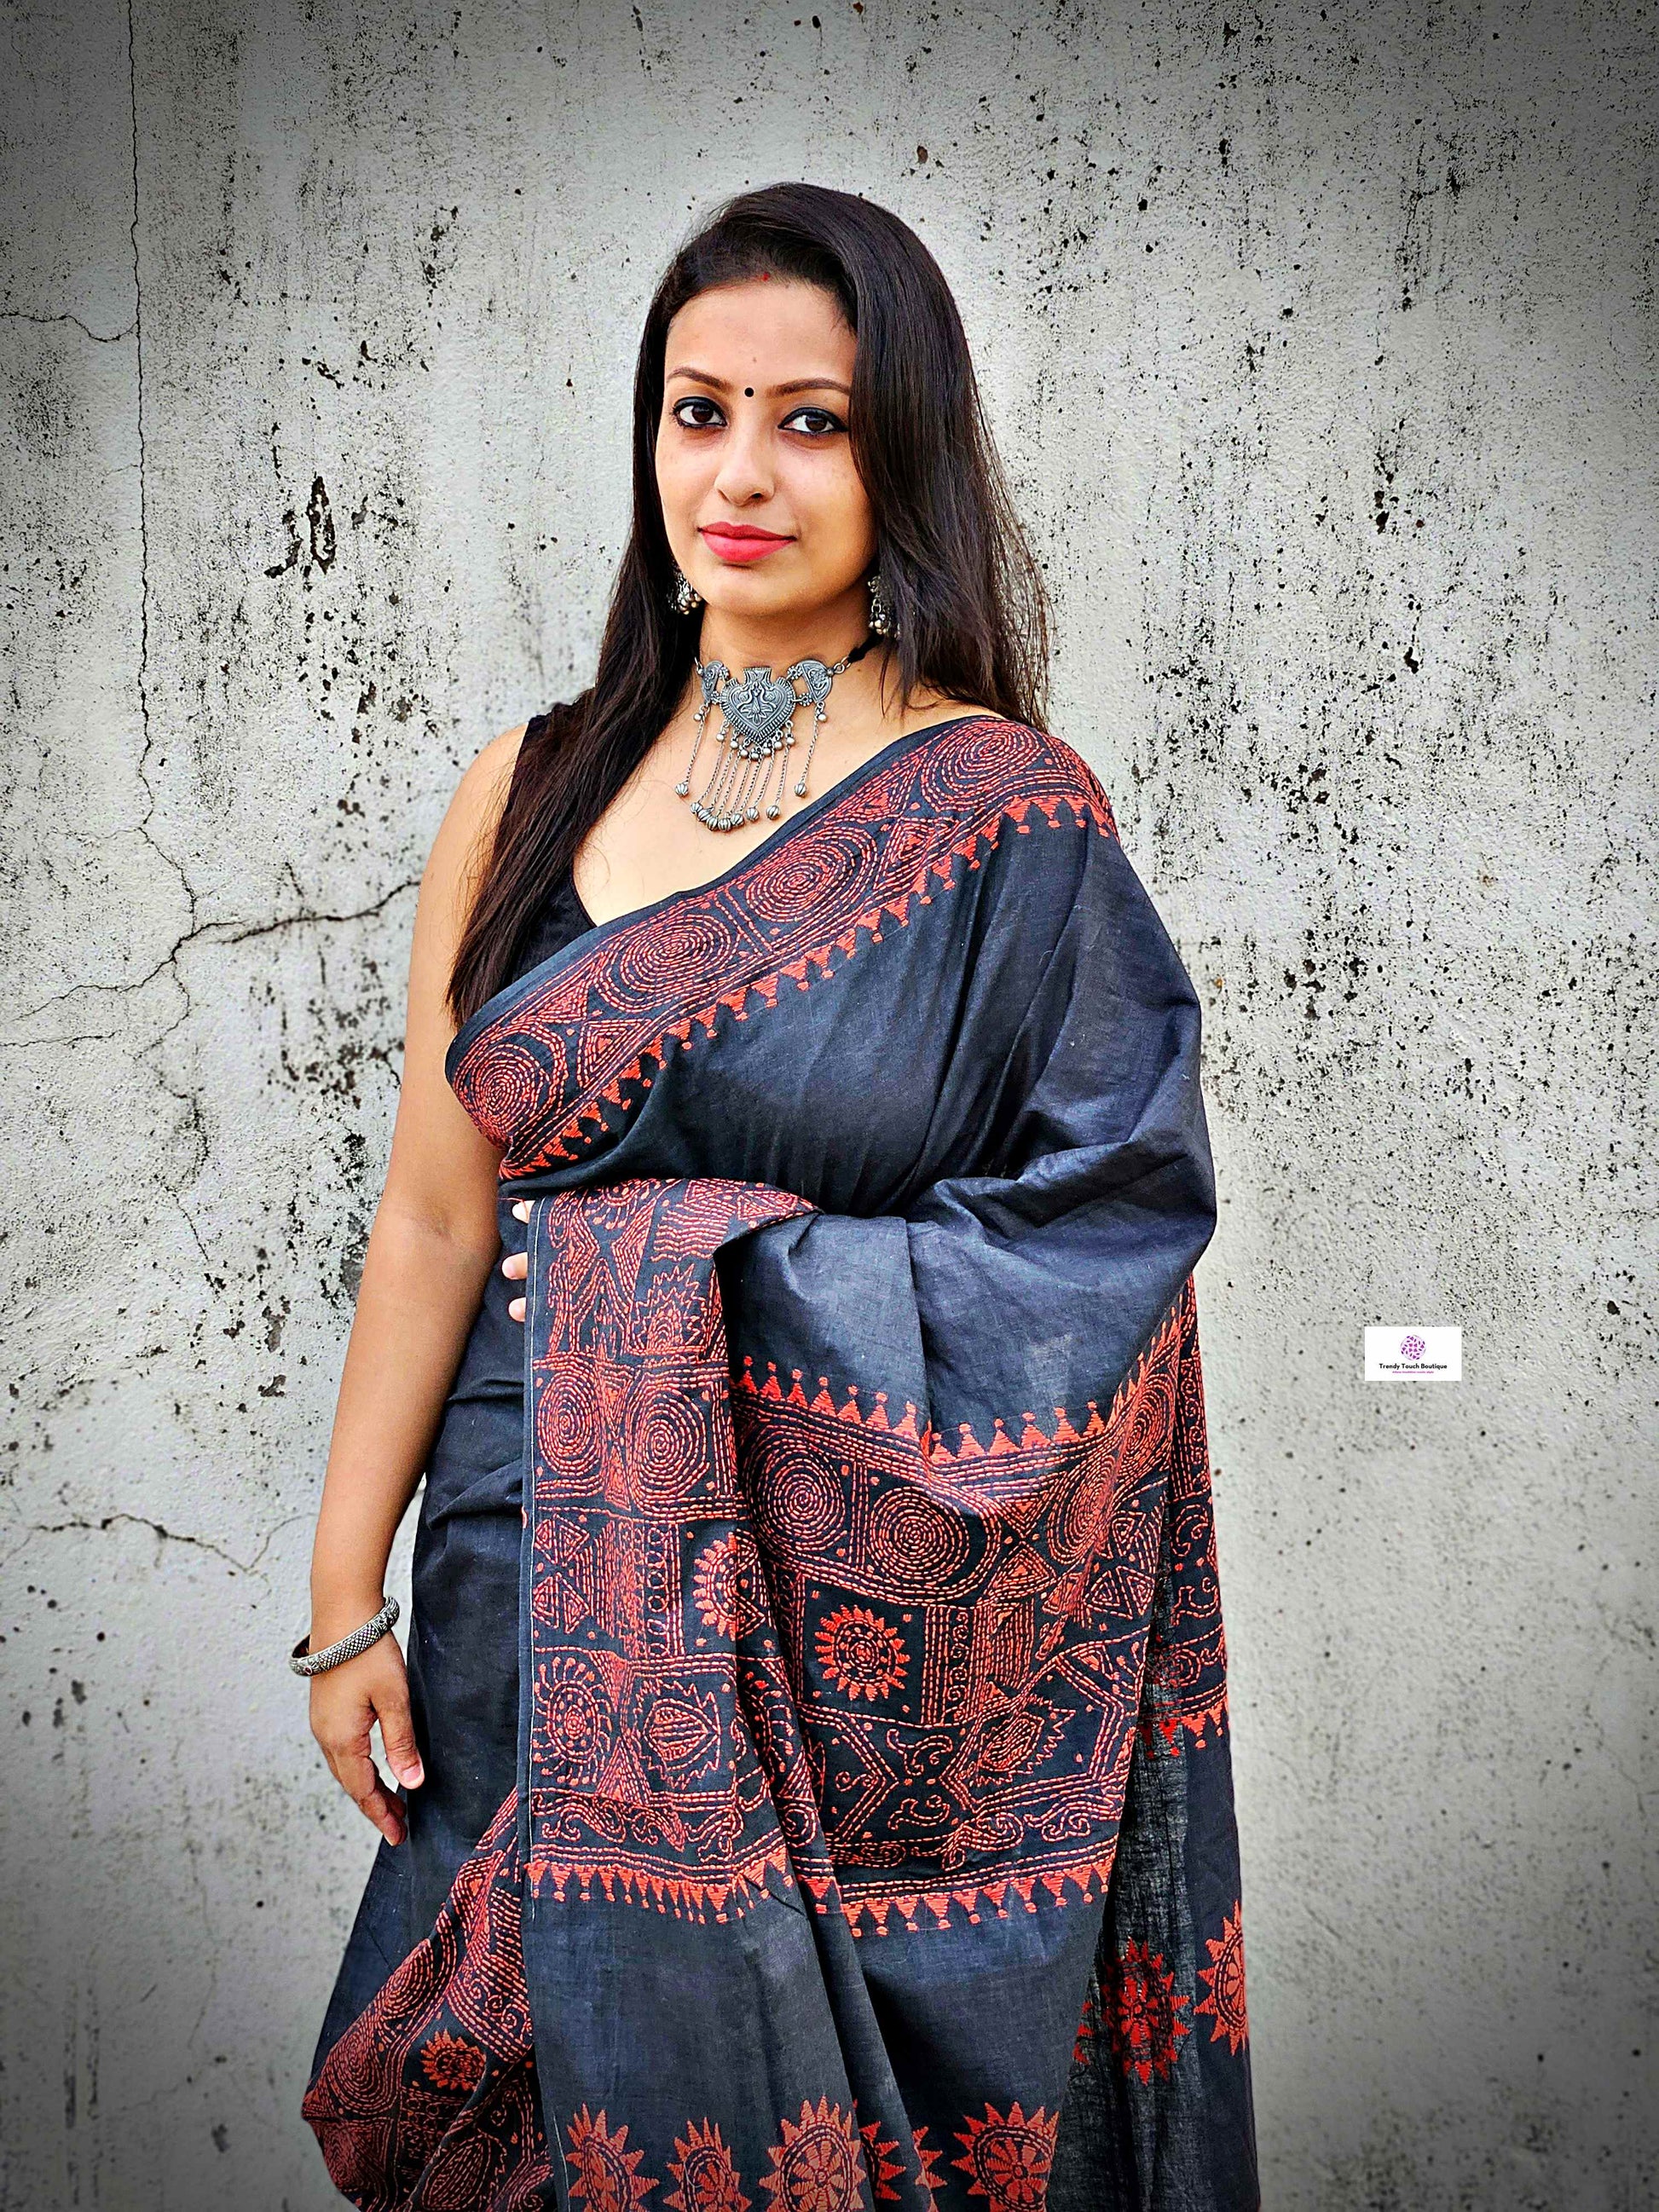 Khadi cotton handloom black saree with orange thread kantha hand embroidered best summer fabric for formal and casual styling marriage functions and family events with blouse piece best price